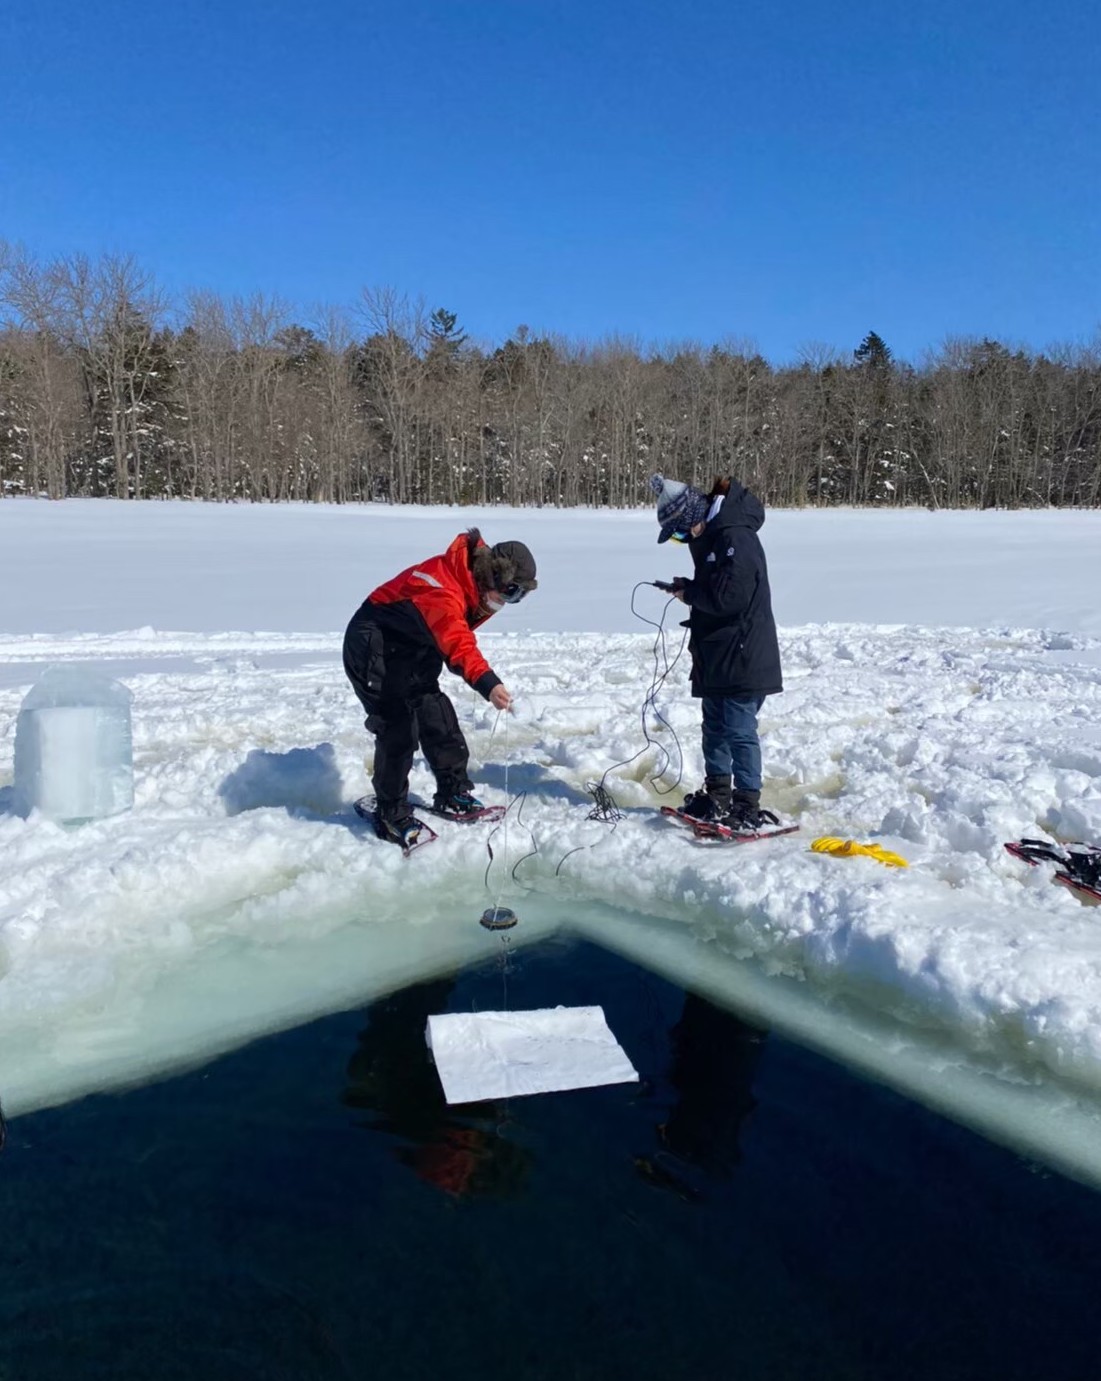 Two researchers drop a measuring device into a large square hole in the snow-covered ice, on a cold and bright sunny day, on Lake Akan.